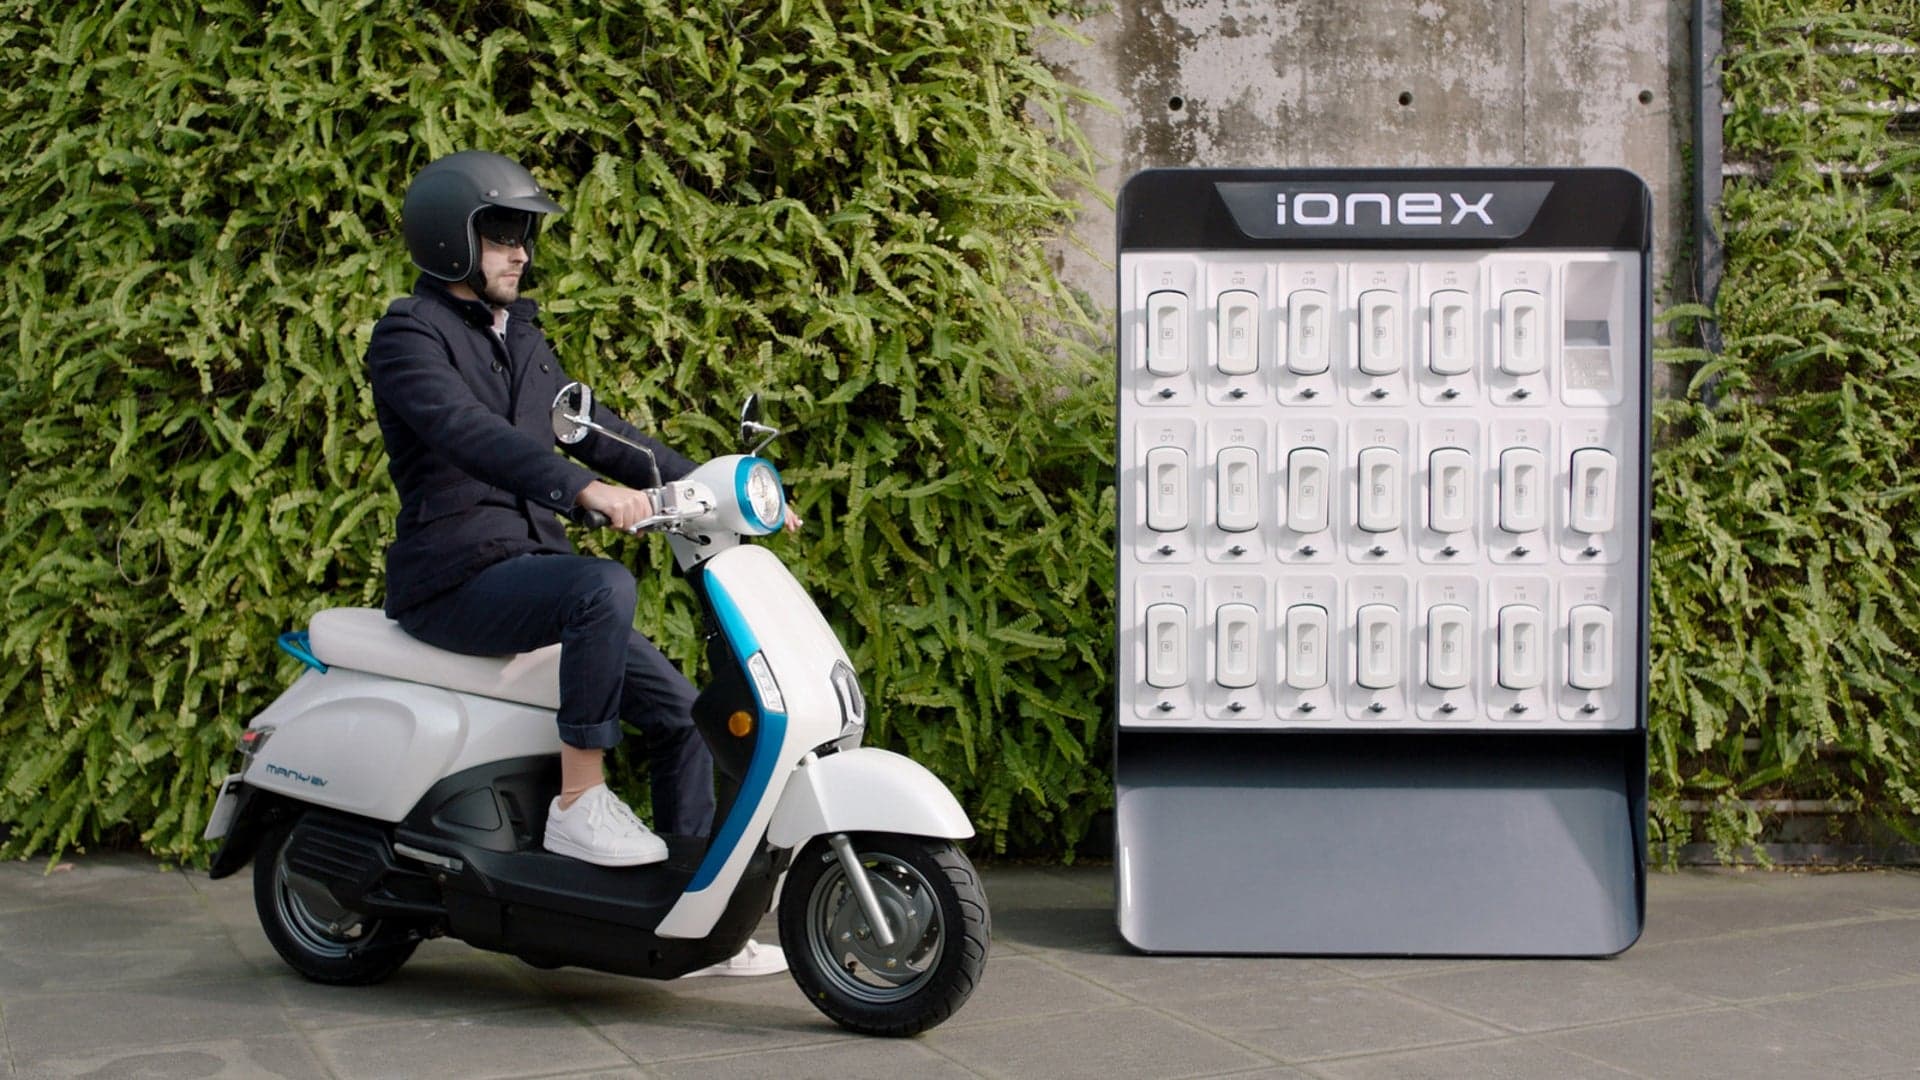 Kymco Unveils Ionex Retro Electric Scooter With Clever Battery System